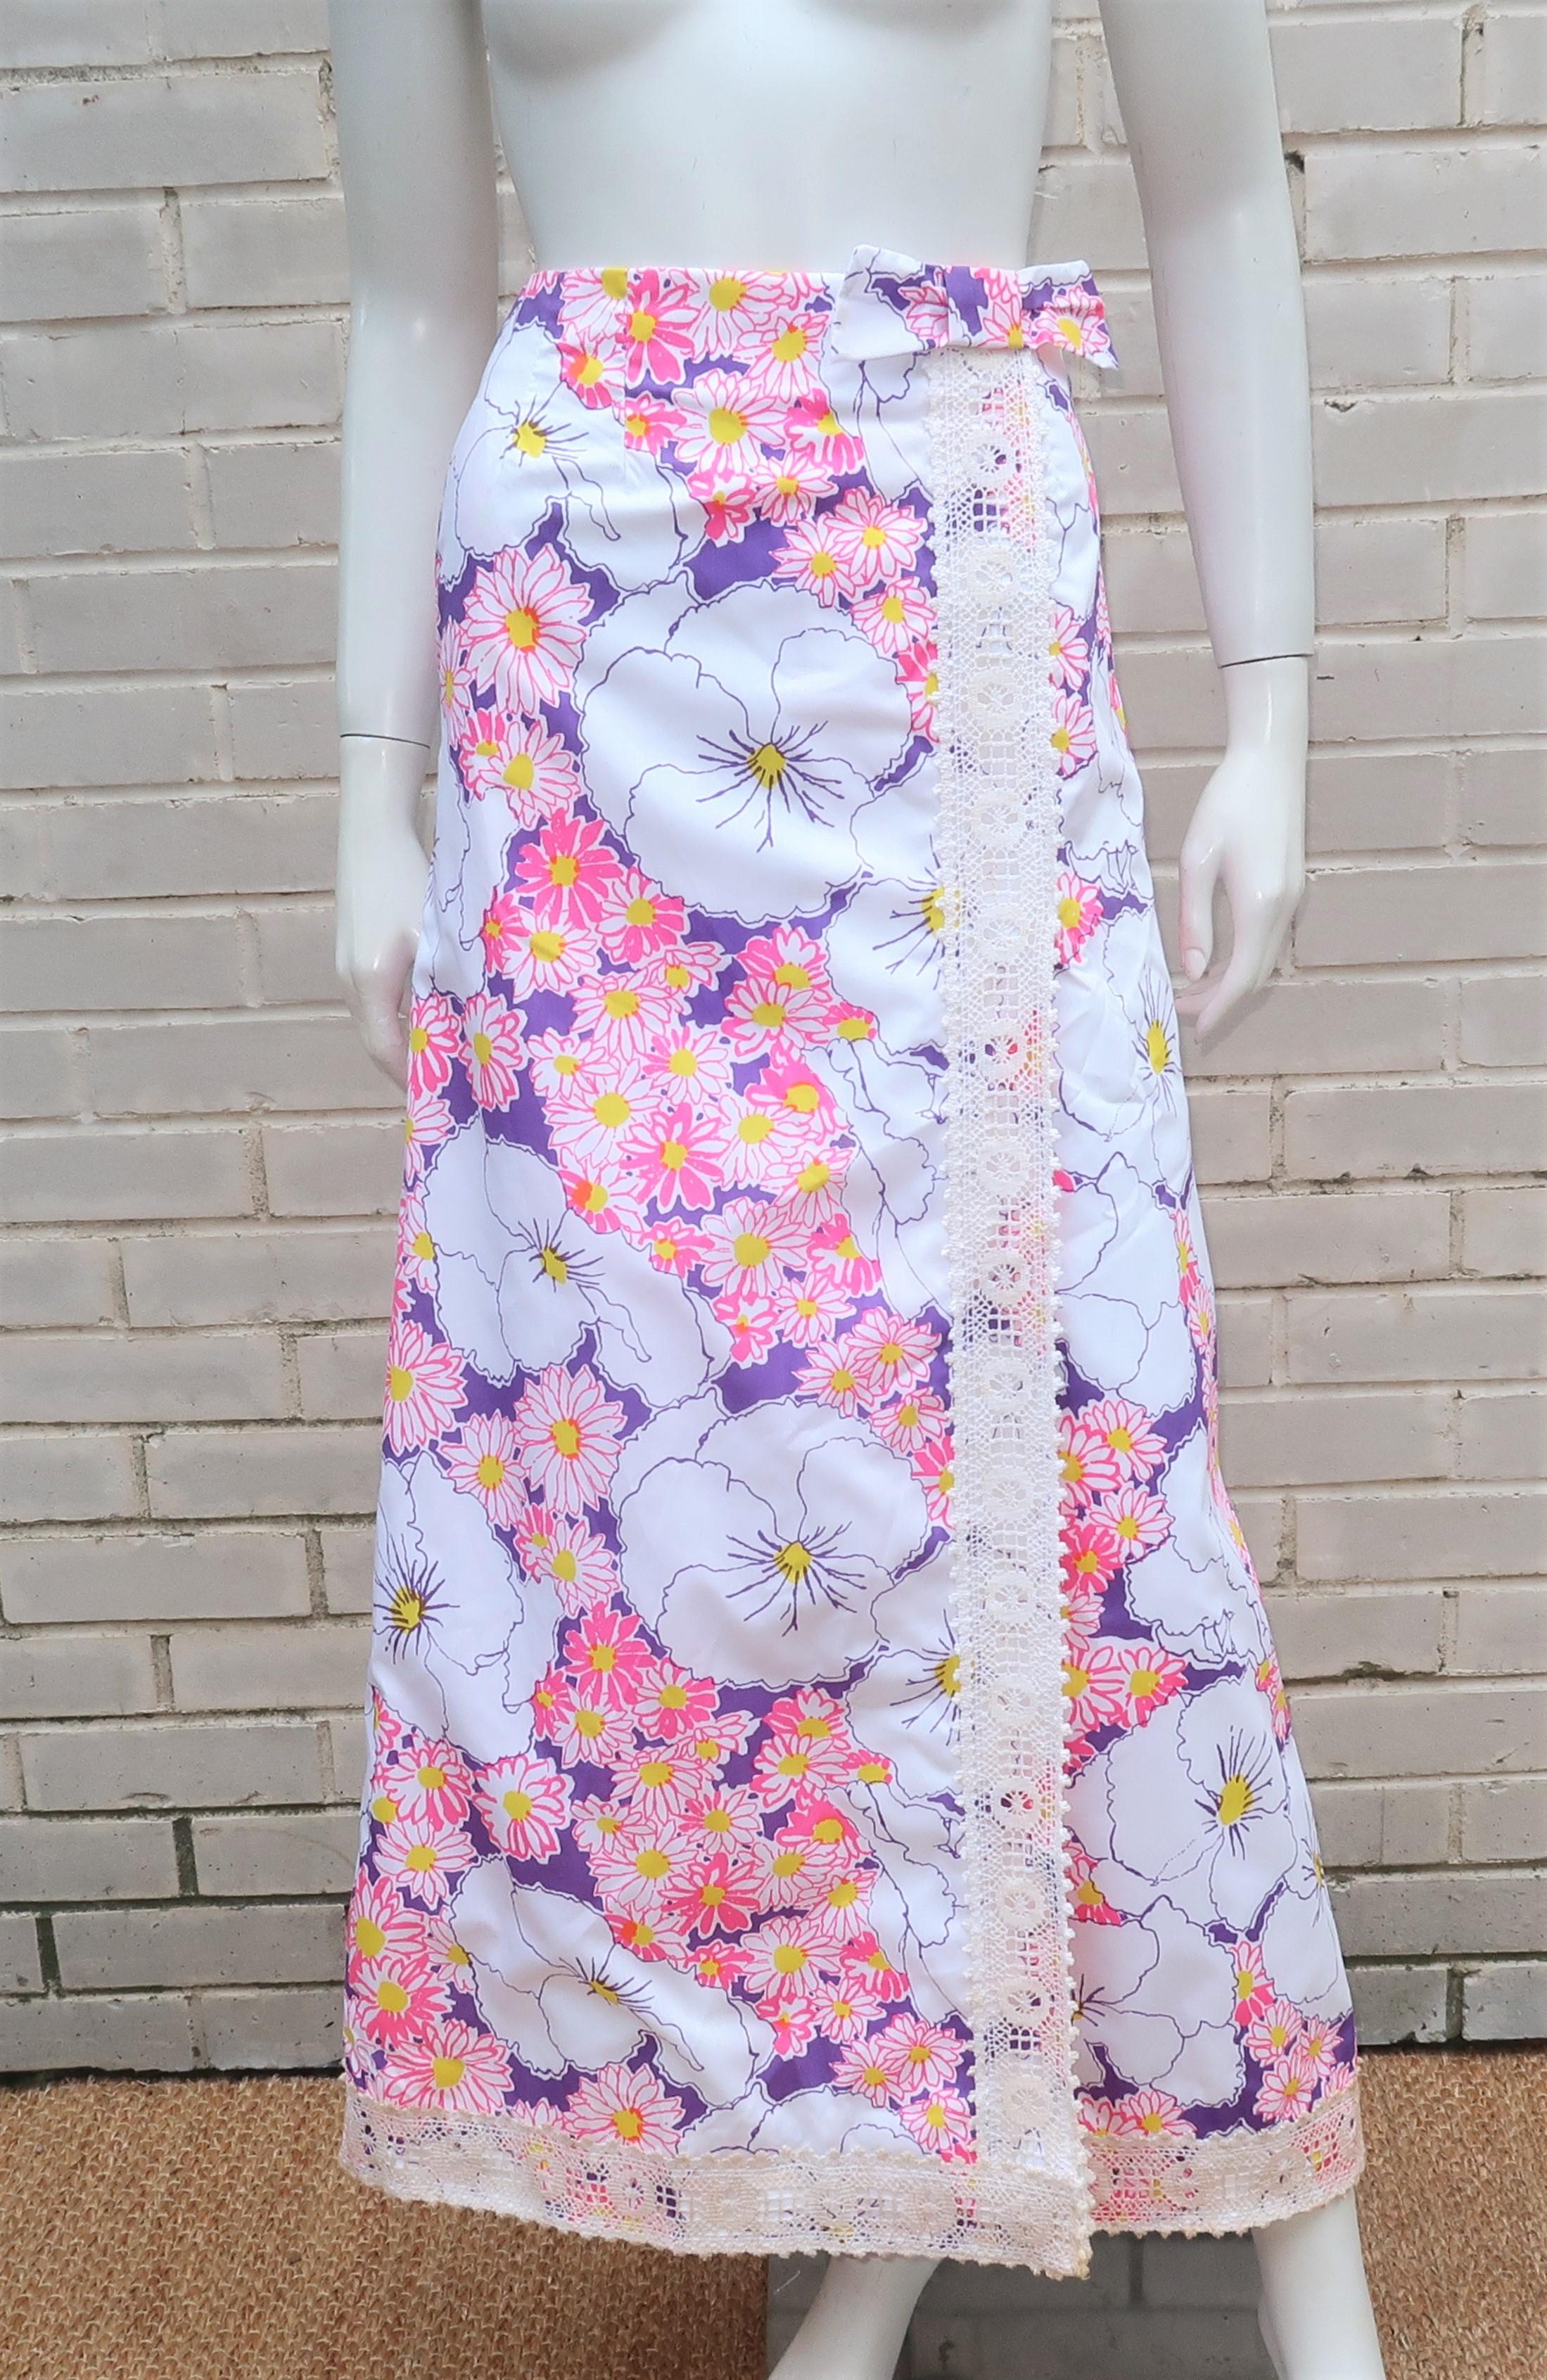 Flower power ... Lilly style!  1960's Lilly Pulitzer floral maxi skirt in shades of hot pink and purple with touches of yellow and white.  The skirt zips and hooks at the back with a bow accent, crochet lace trim down the front slit and hem and one